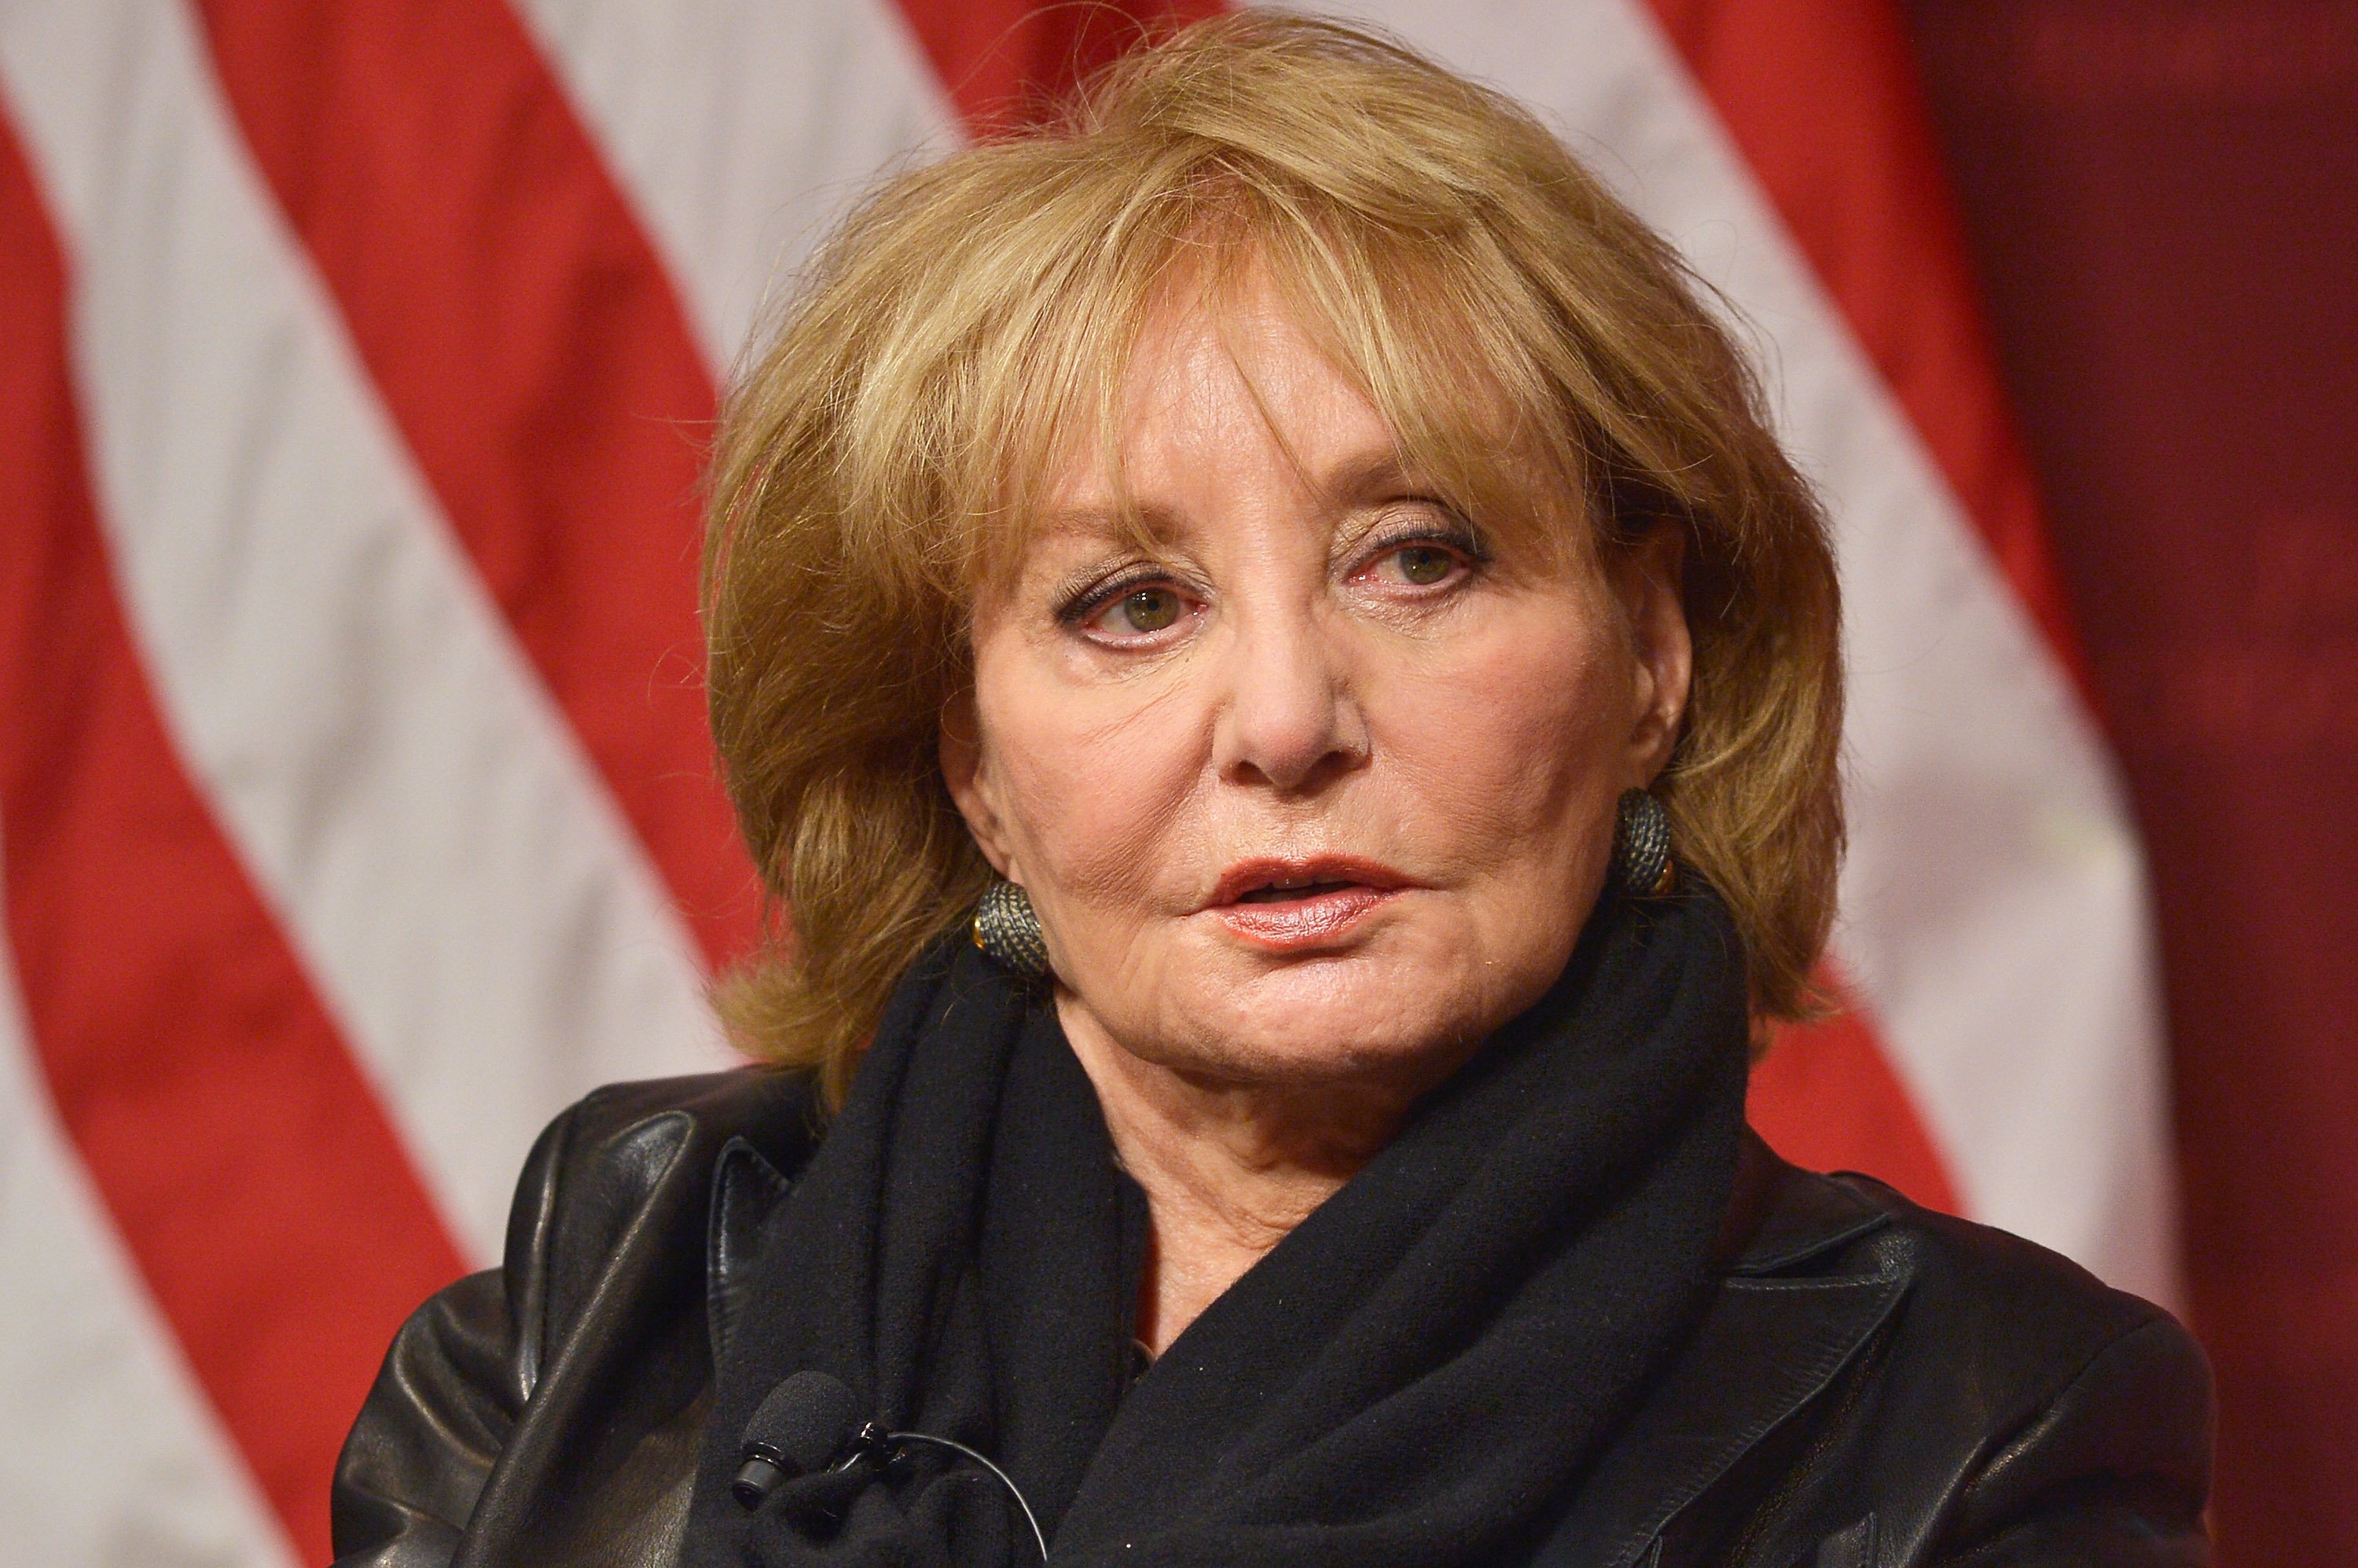 Barbara Walters speaks at the The John F. Kennedy Jr. Forum presents An Evening with Barbara Walters at Harvard University on October 7, 2014 | Photo: GettyImages